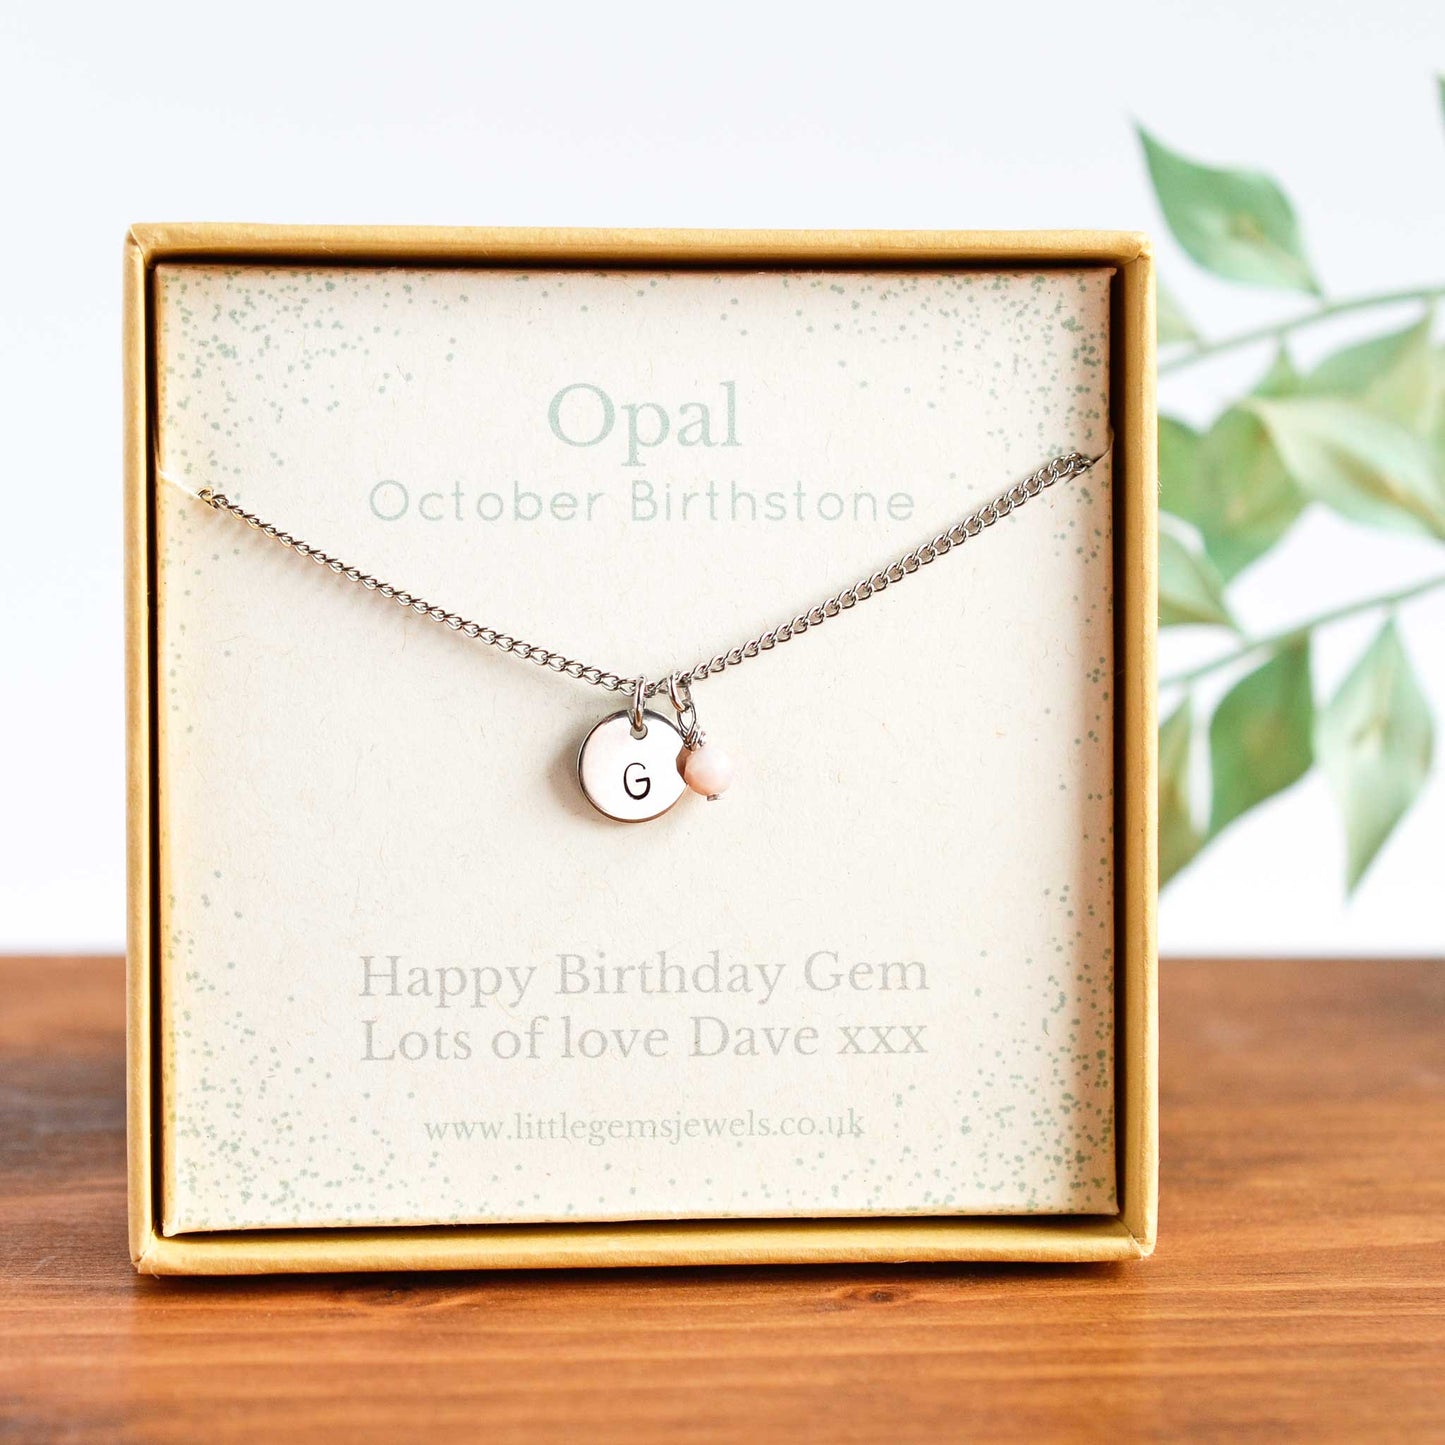 October Birthstone necklace with initial charm & personalised gift message in eco friendly gift box